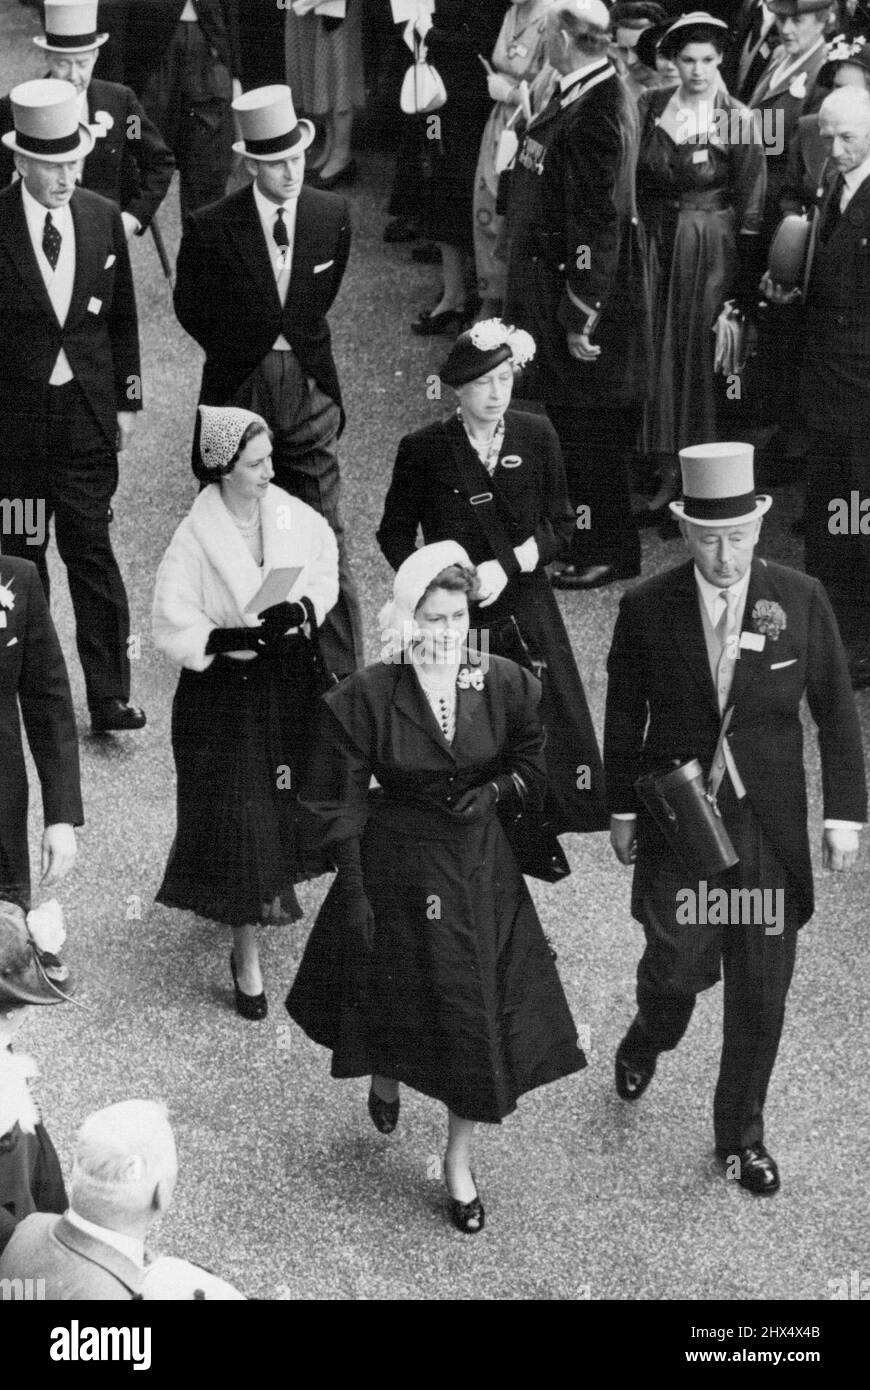 The Royal Ascot Meeting -- Walking to the Paddock at the royal Ascot race meeting. H.M. Queen Elizabeth leading with the Duke of Norfolk, followed by Princess Margaret (left) with the Princess Royal, and the Duke of Edinburgh (right) with Captain C. Moore, the Royal racing manager. June 19, 1952. (Photo by Sport & General Press Agency, Limited). Stock Photo